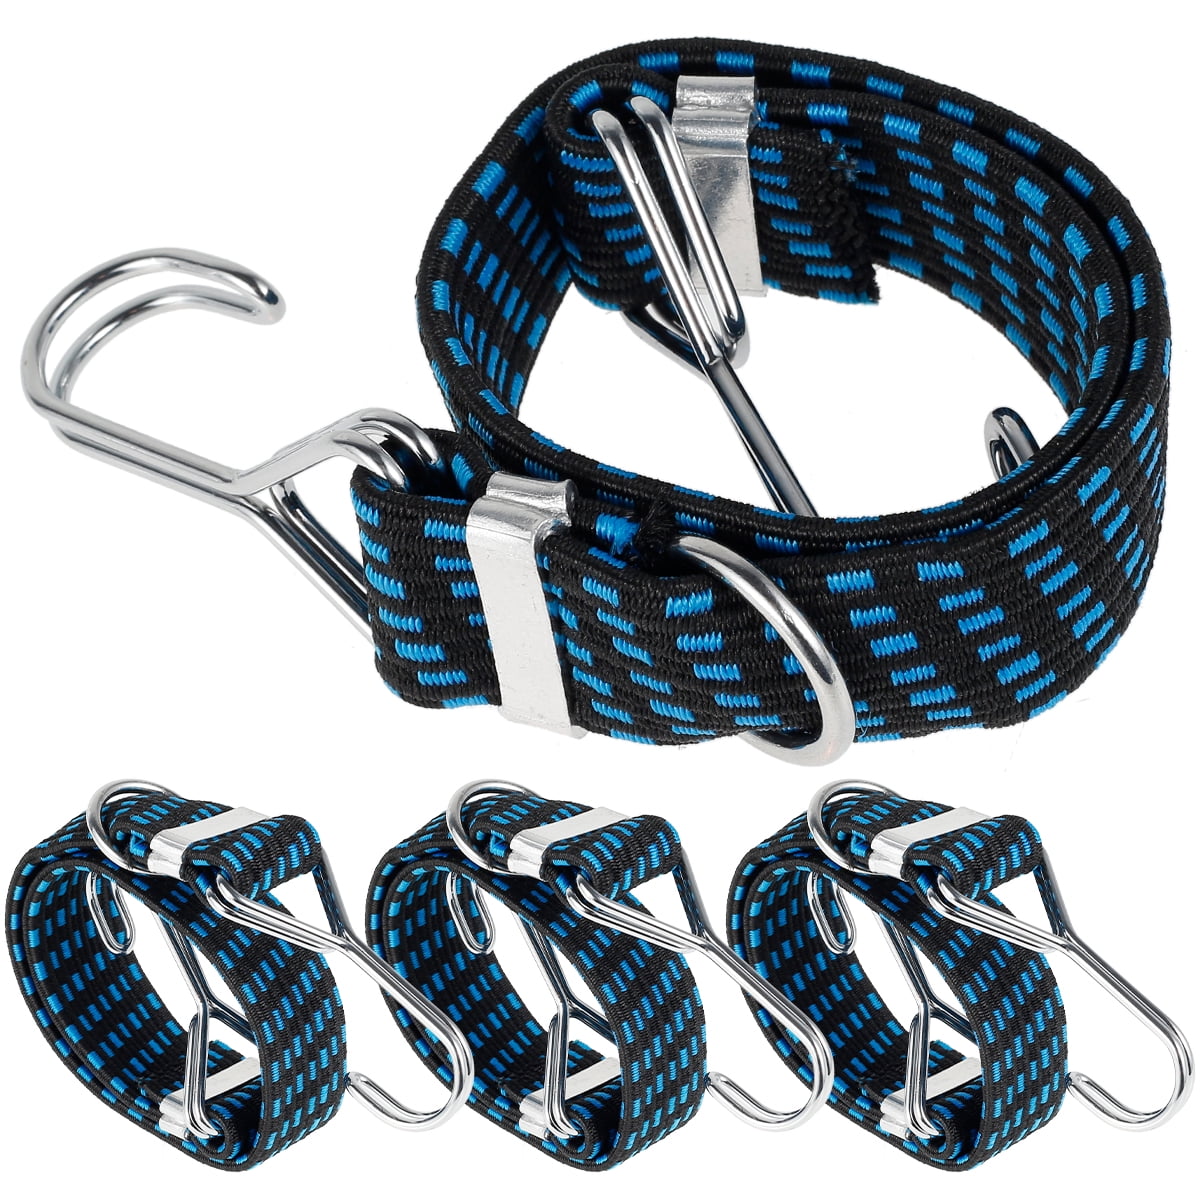 Cycling Luggage Strap Luggage Elastics  36'' Pack of 10 Bungee Cord Spiral Hook 